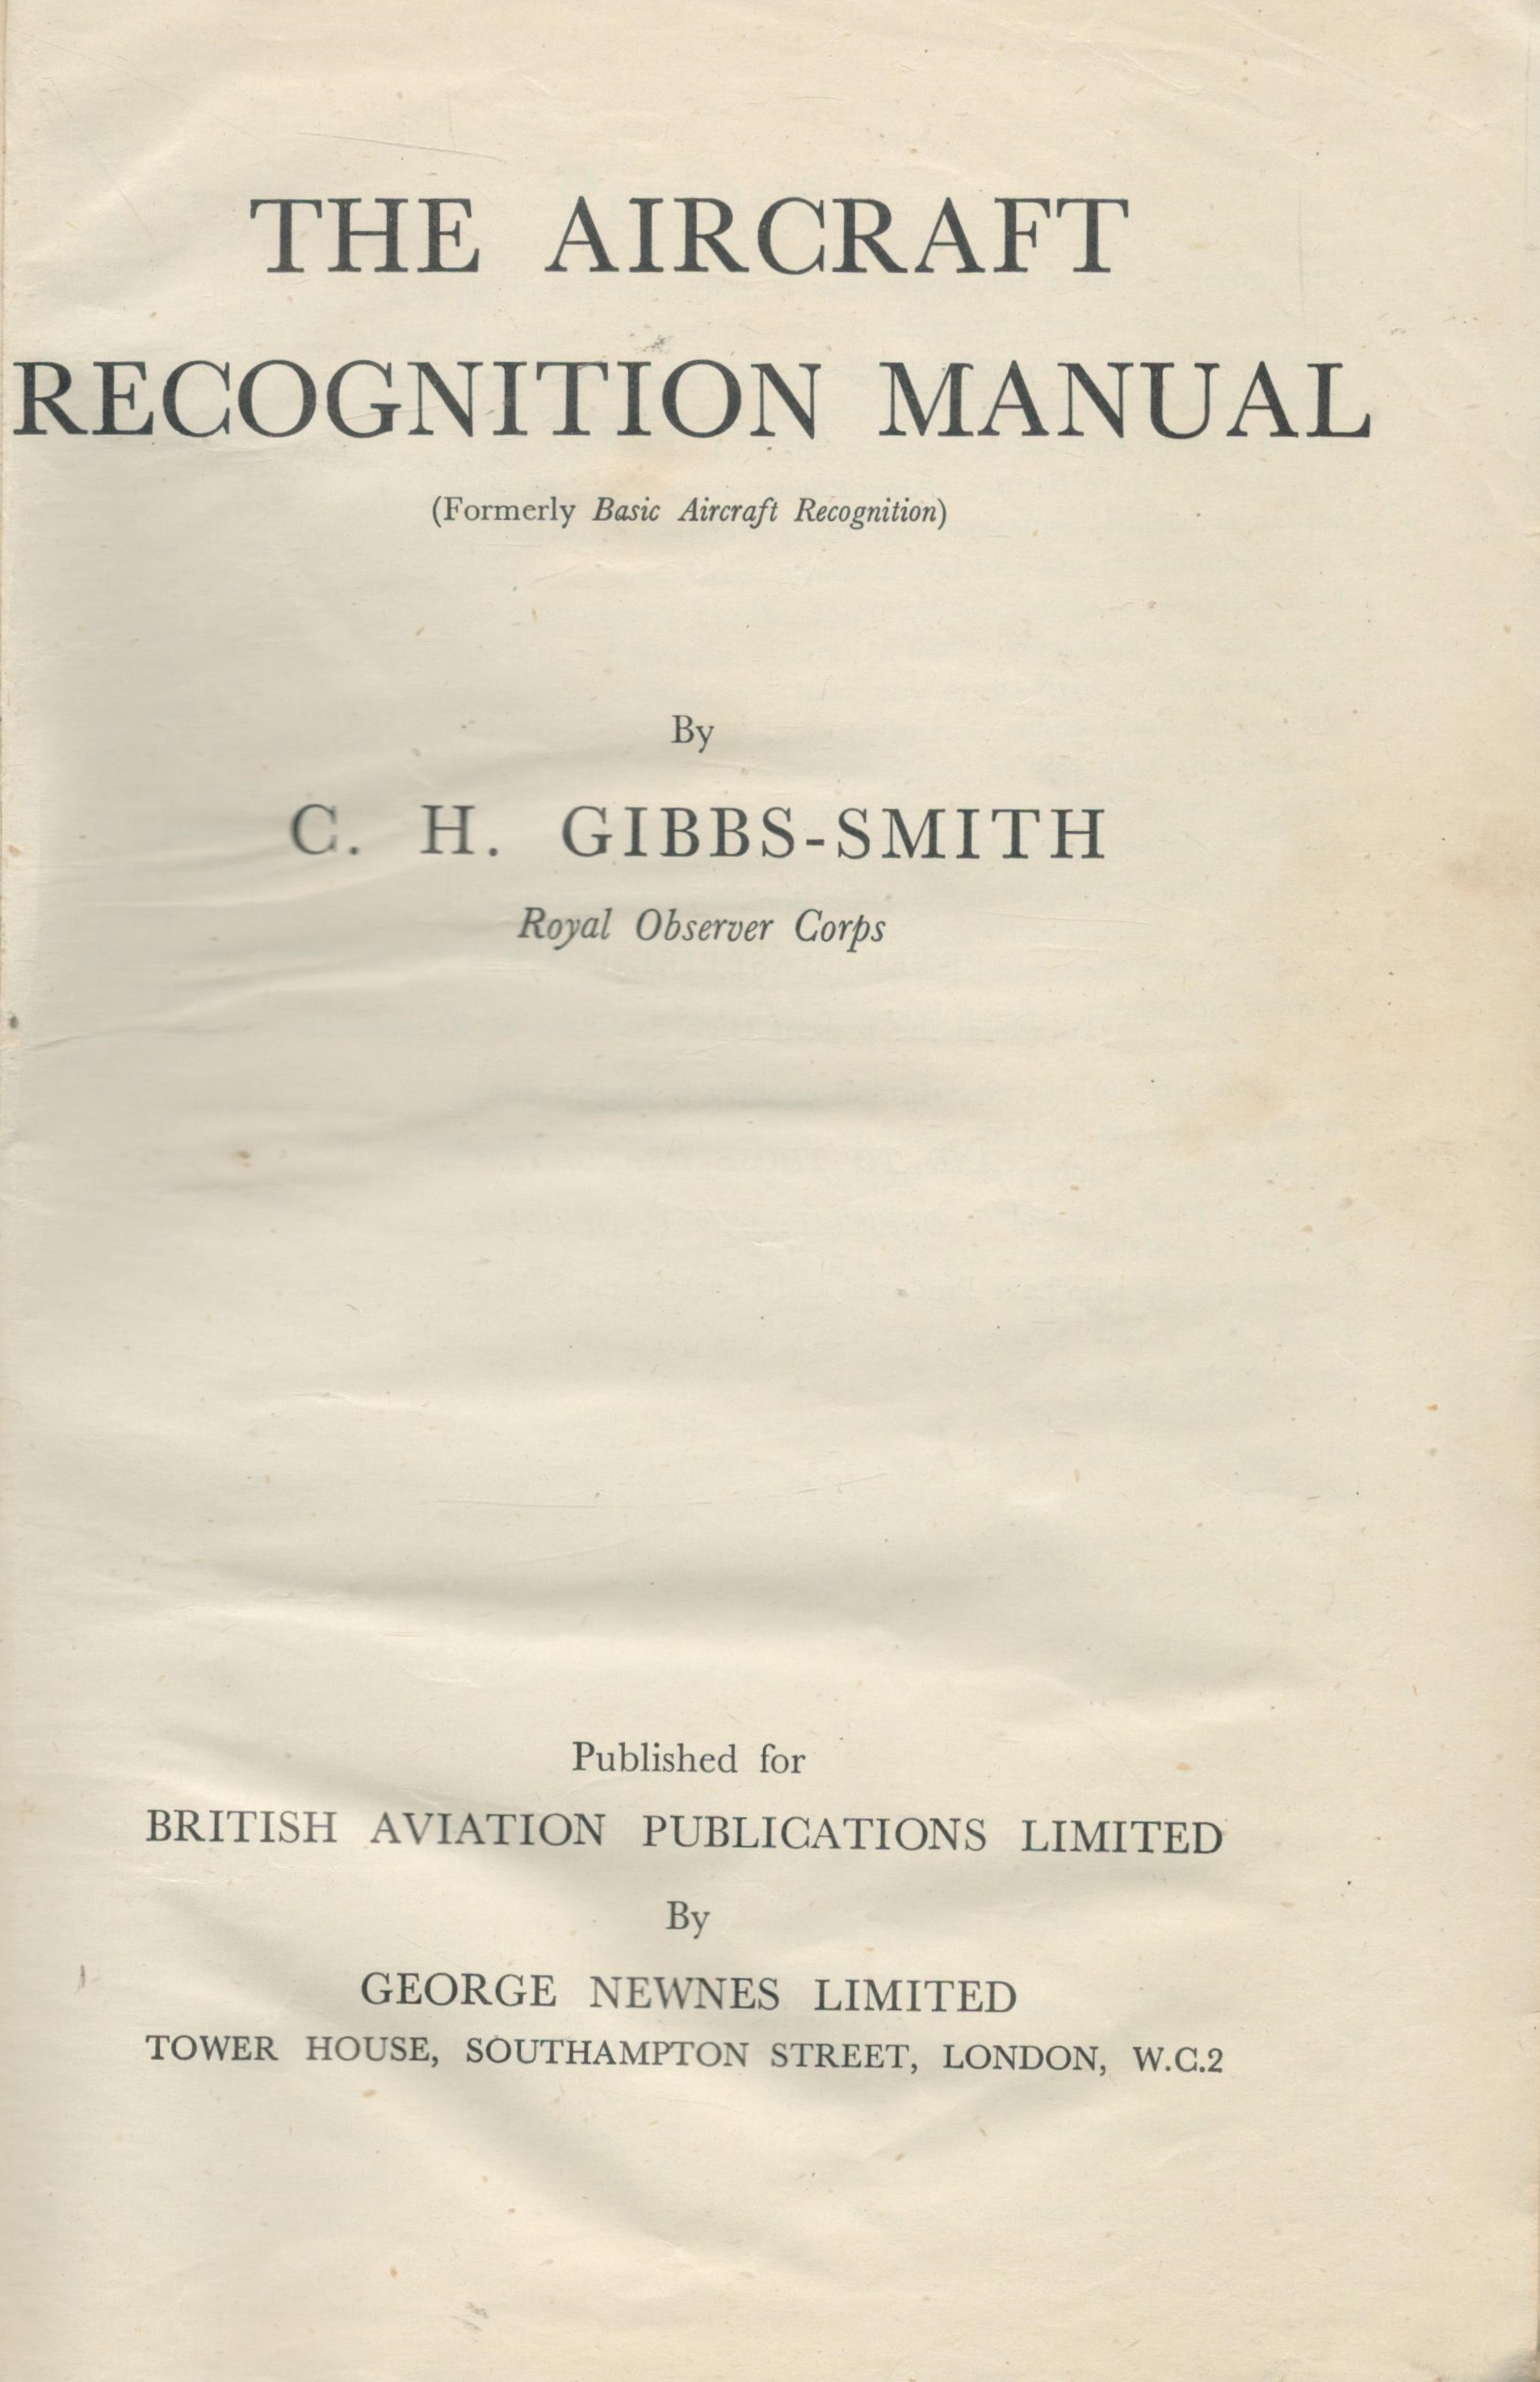 WW2 CH Gibbs-Smith Book Titled The Aircraft Recognition Manual. Small tearing on spine jacket. - Image 2 of 3